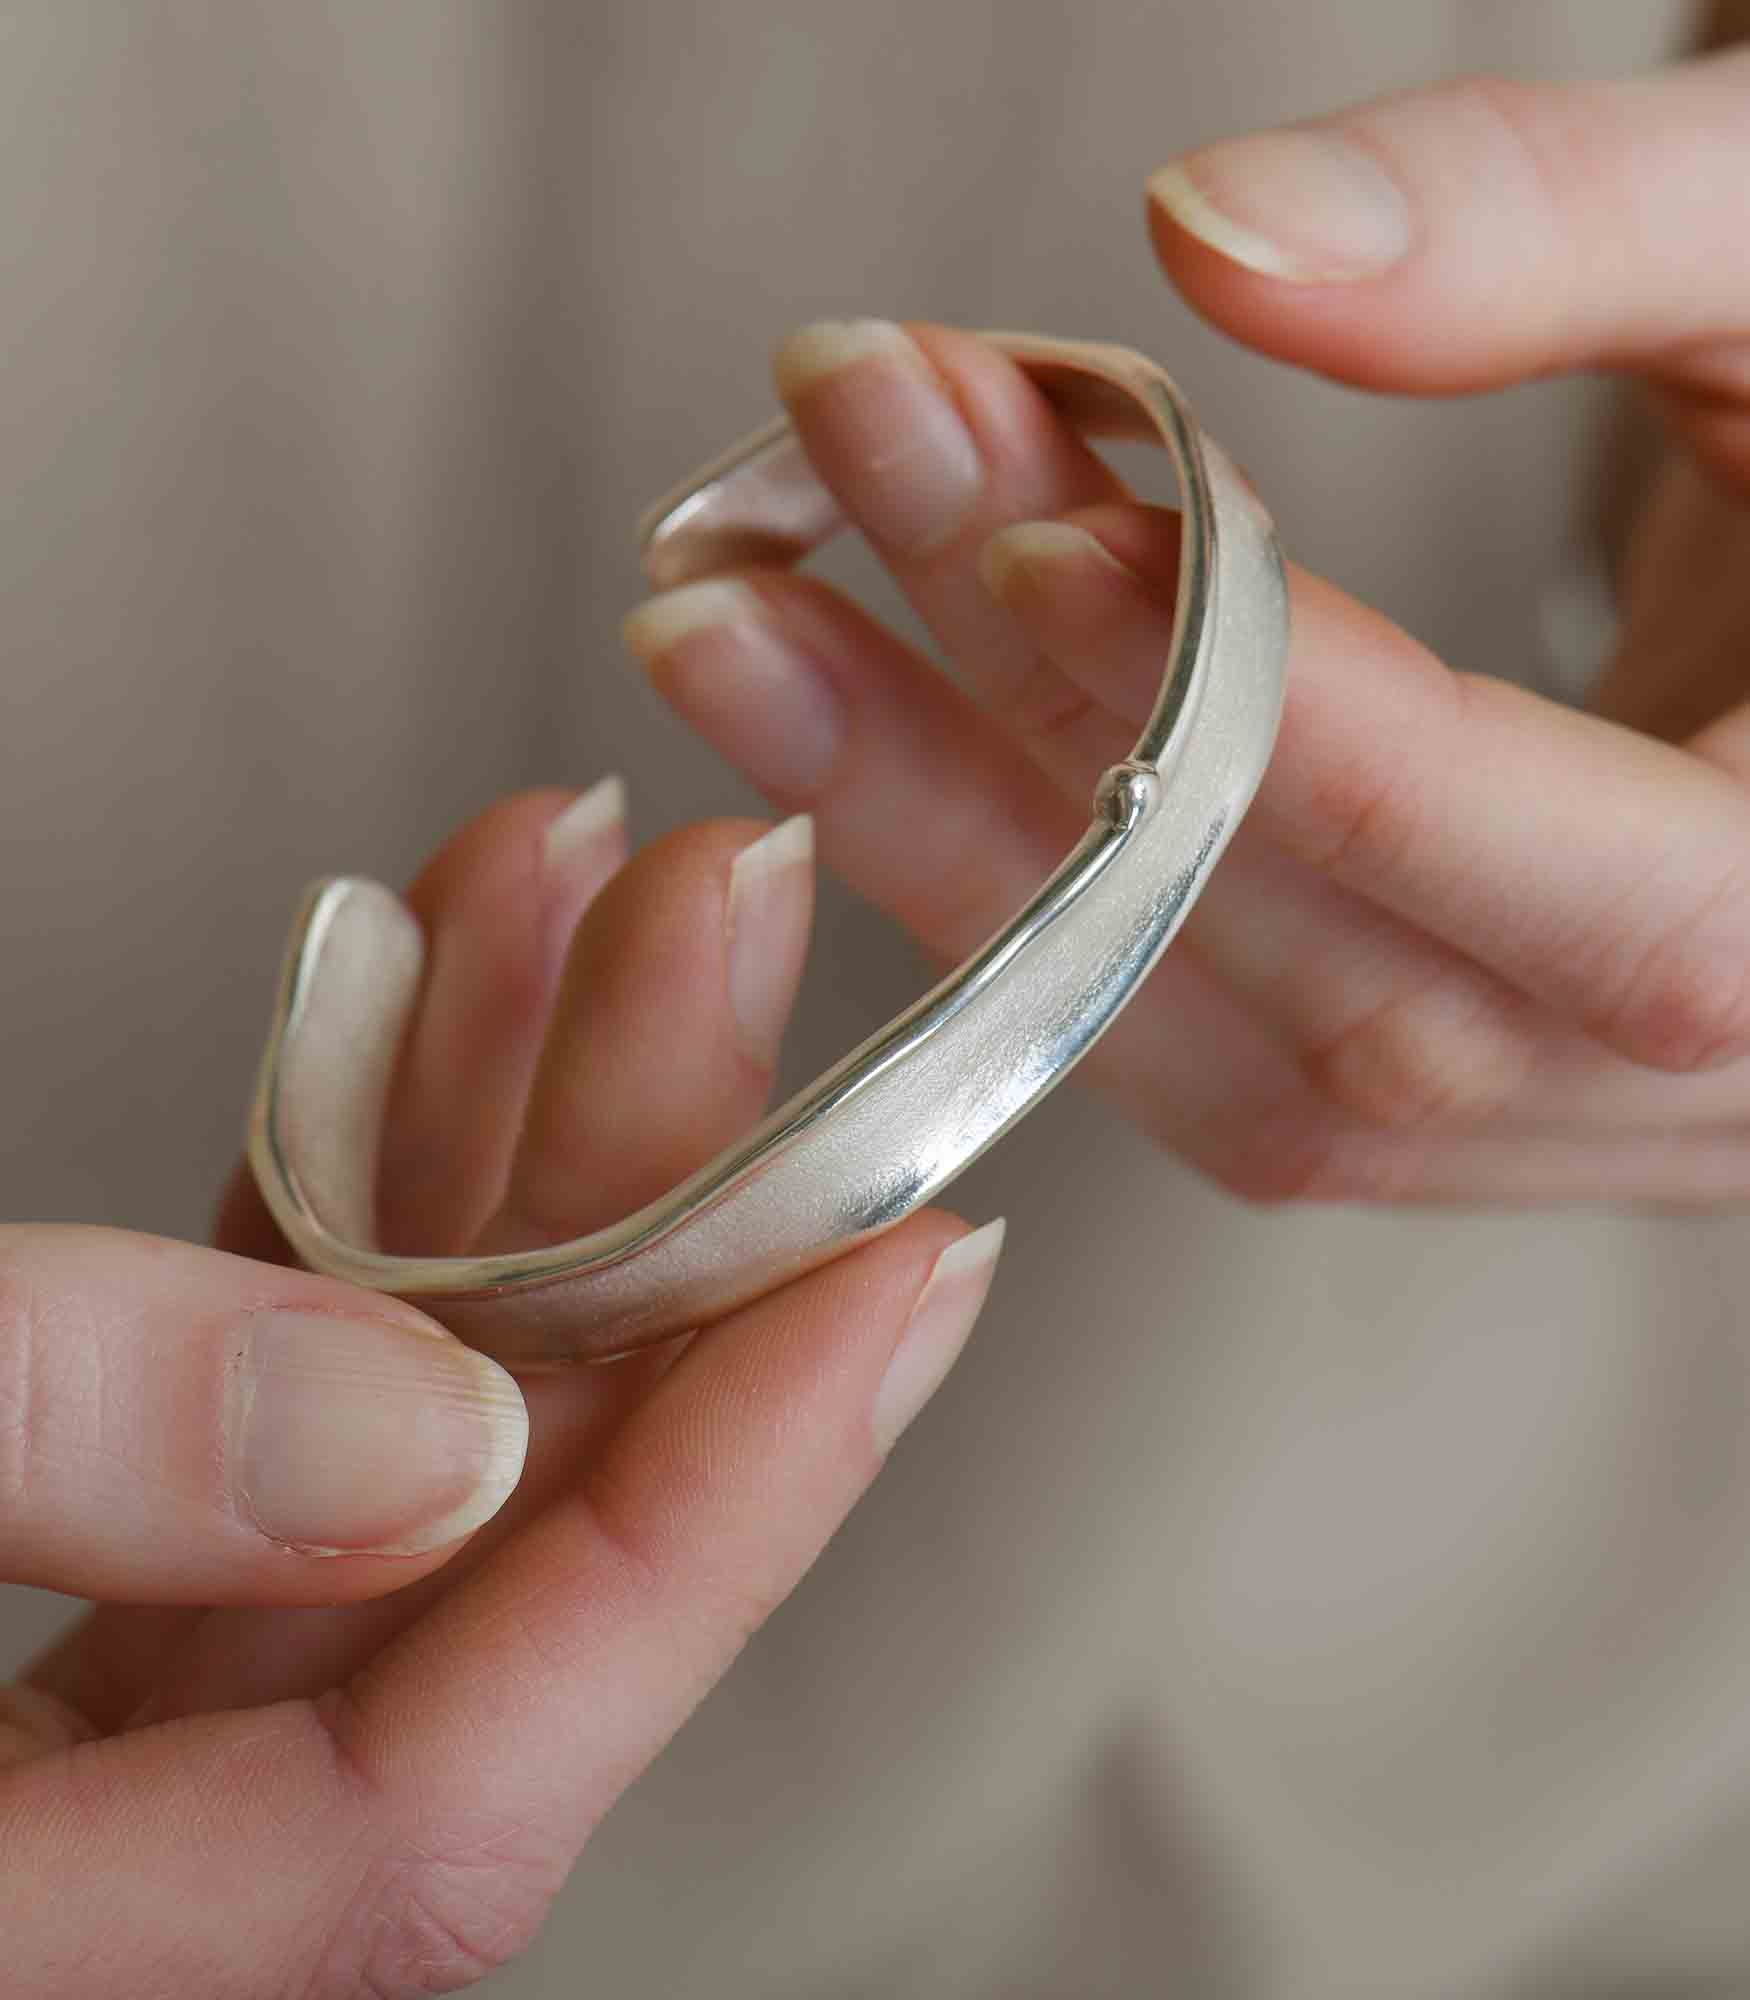 A sterling silver bangle bracelet featuring a minimalistic design with a simple brushstroke texture.